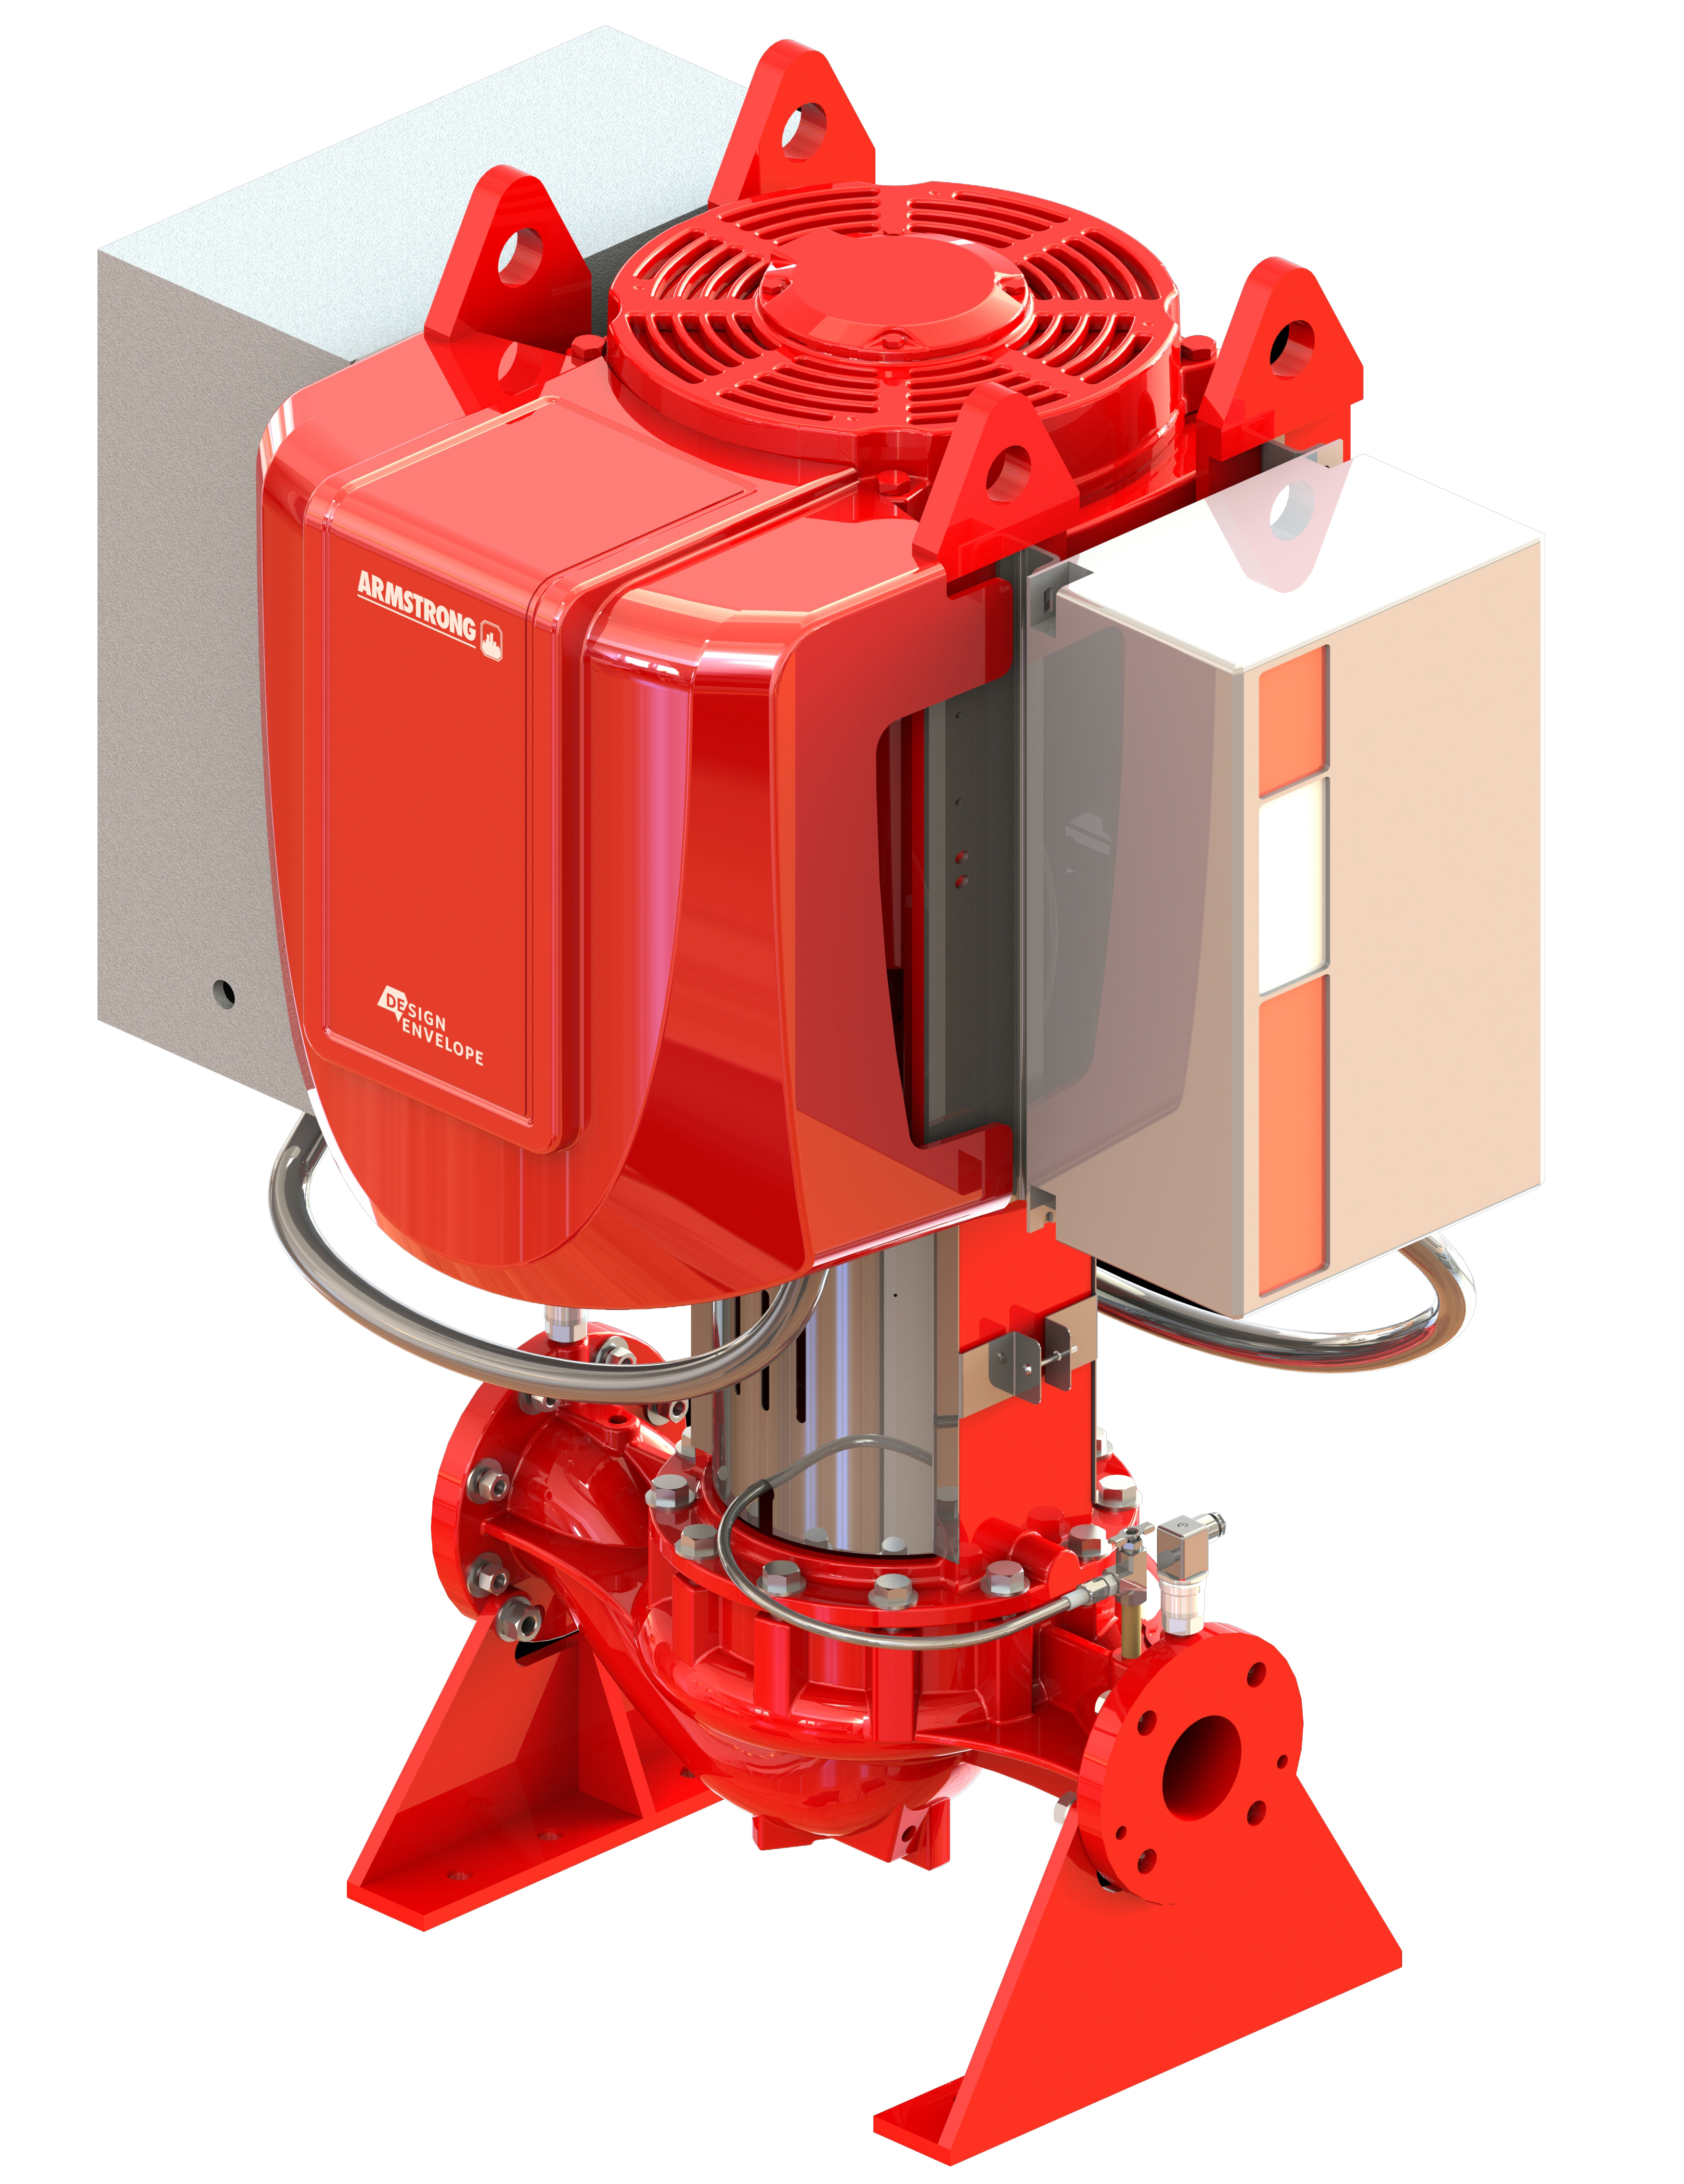 Armstrong Introduces the Industry’s First Self-Regulating Variable-Speed Fire Pump with Fire Manager